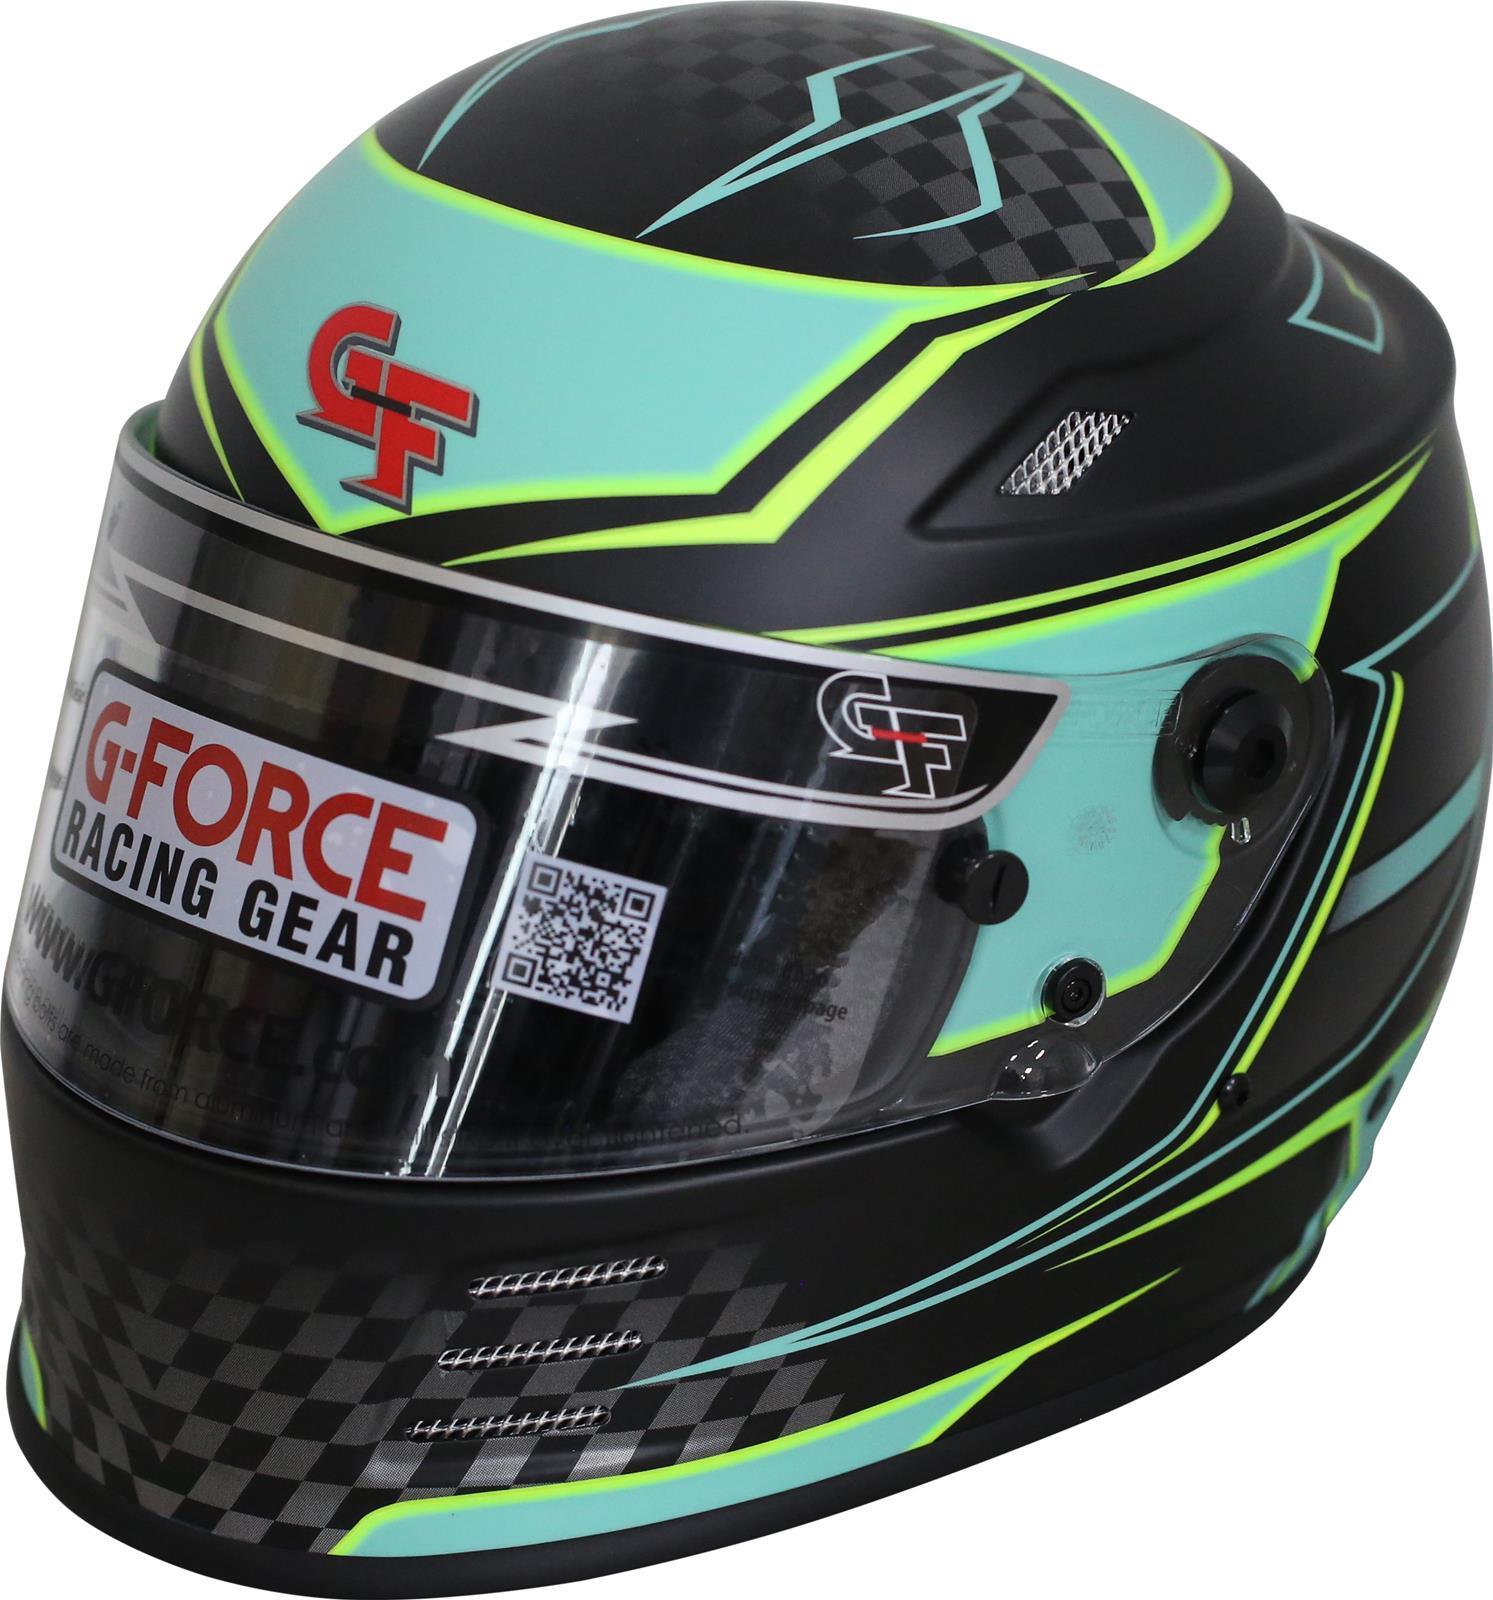 G-Force Racing Gear 13005XXLTL Helmet, Revo Graphics, Full Face, Snell SA2020, Head and Neck Support Ready, Black / Teal, 2X-Large, Each